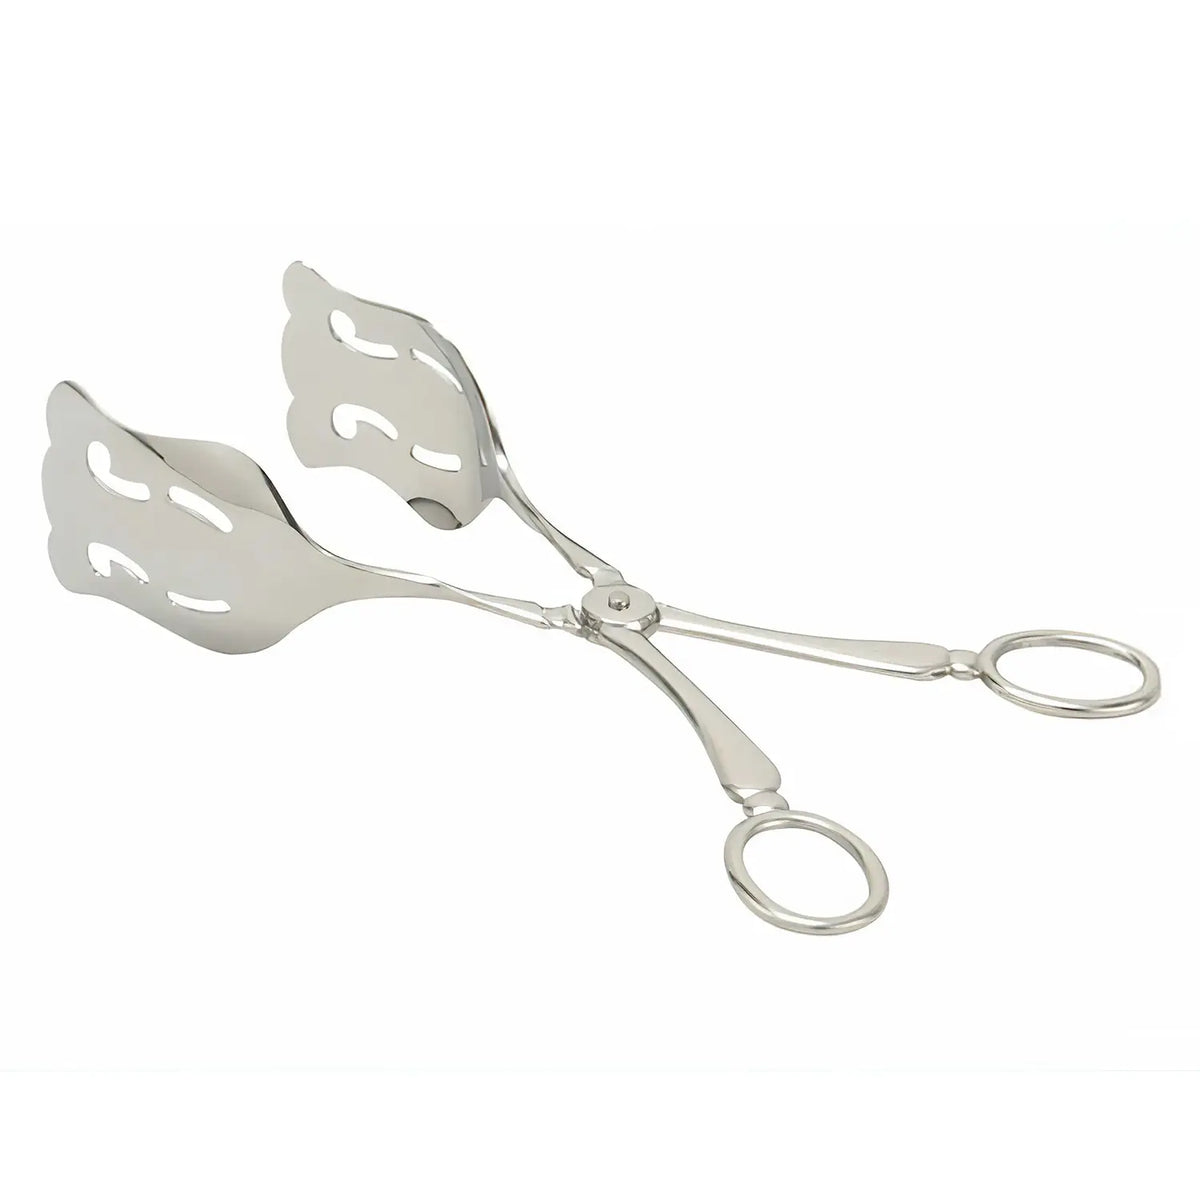 TKG Stainless Steel Perforated Pastry Tongs